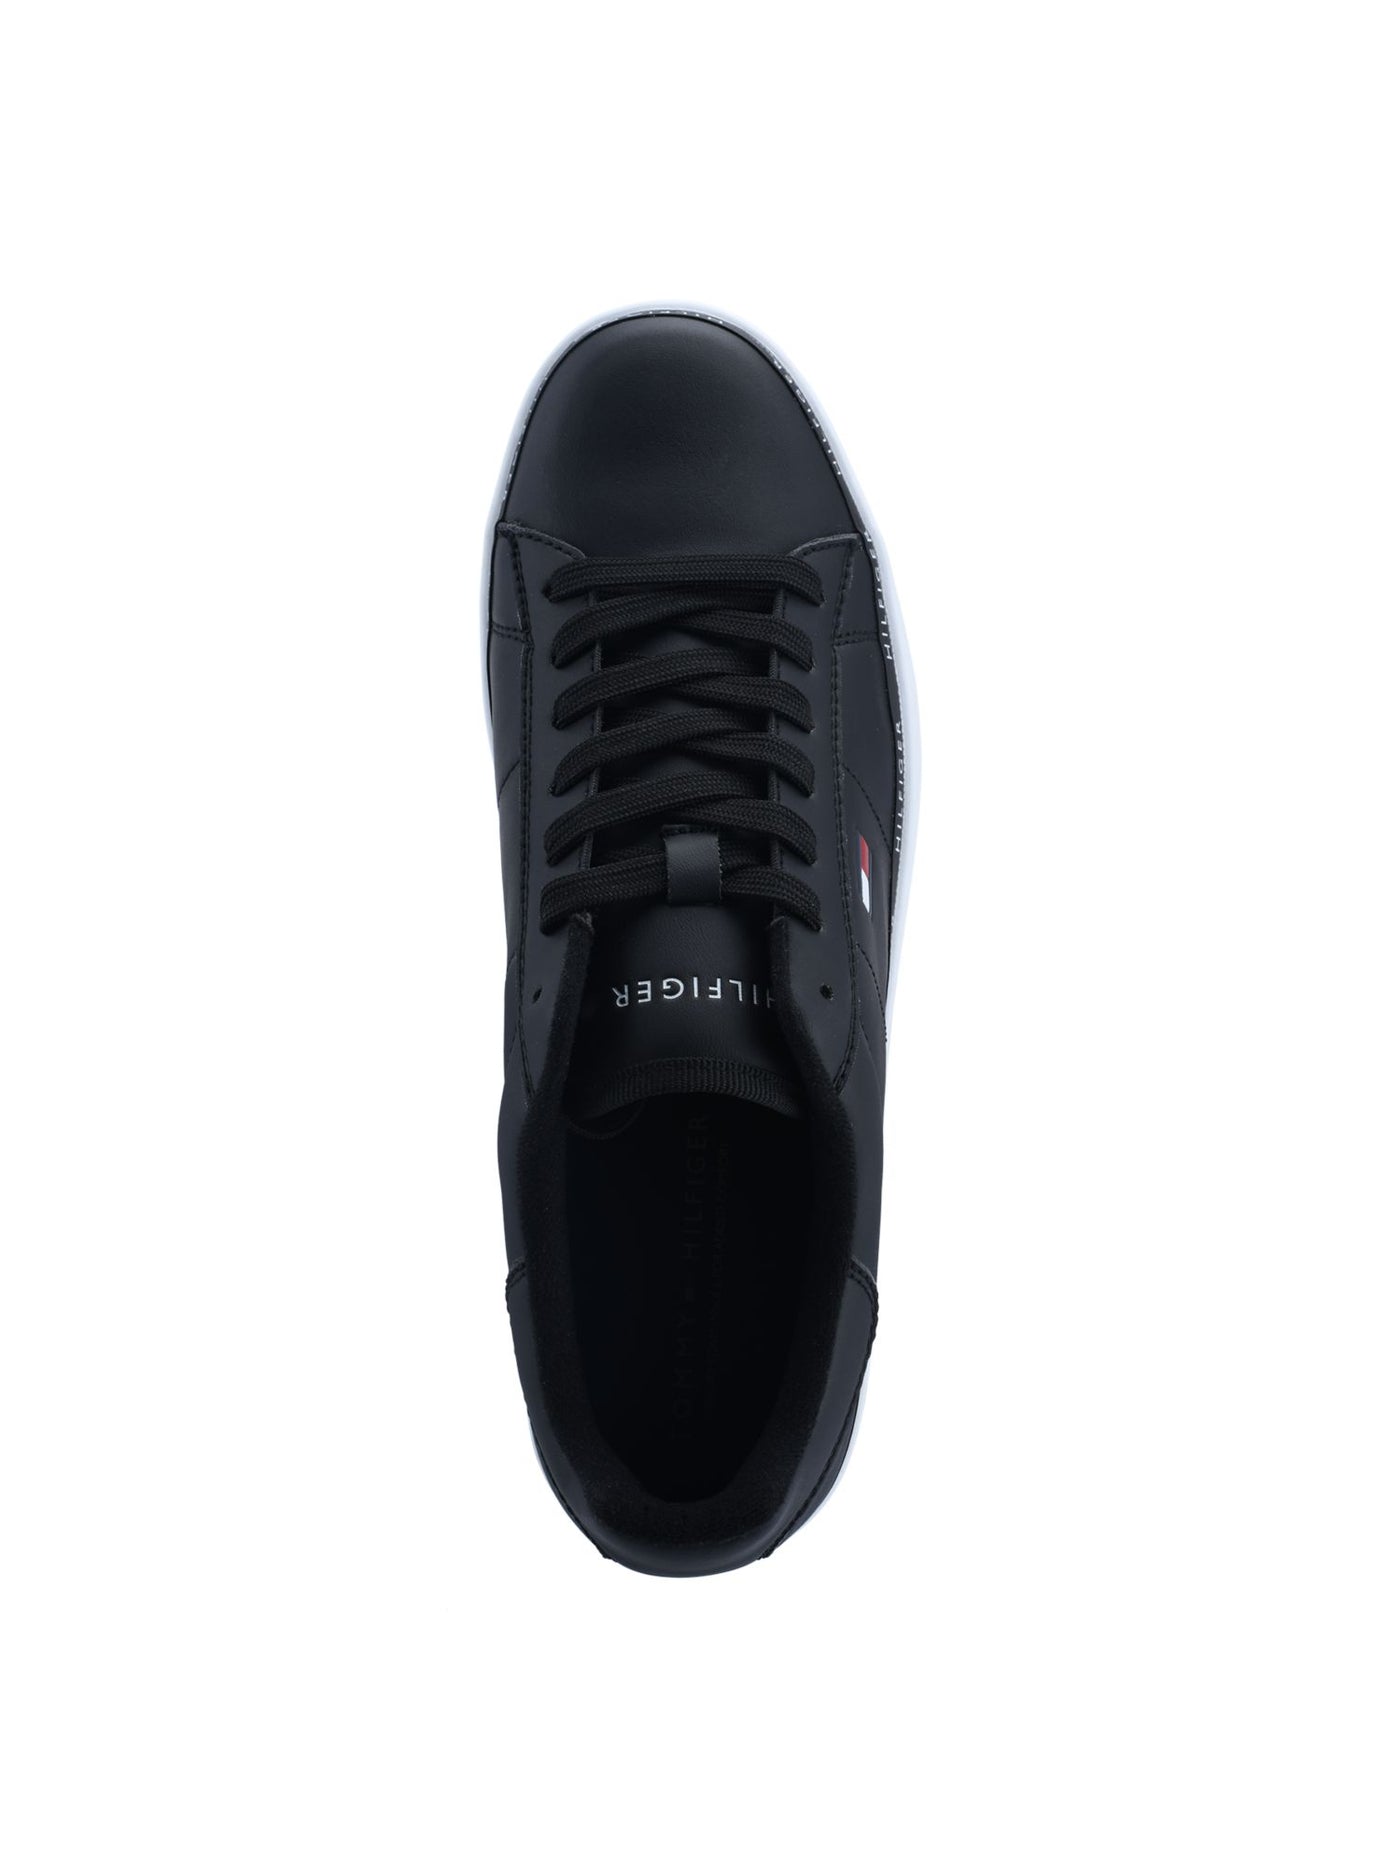 TOMMY HILFIGER Mens Black Removable Insole Cushioned Lewin Round Toe Platform Lace-Up Sneakers Shoes 11.5